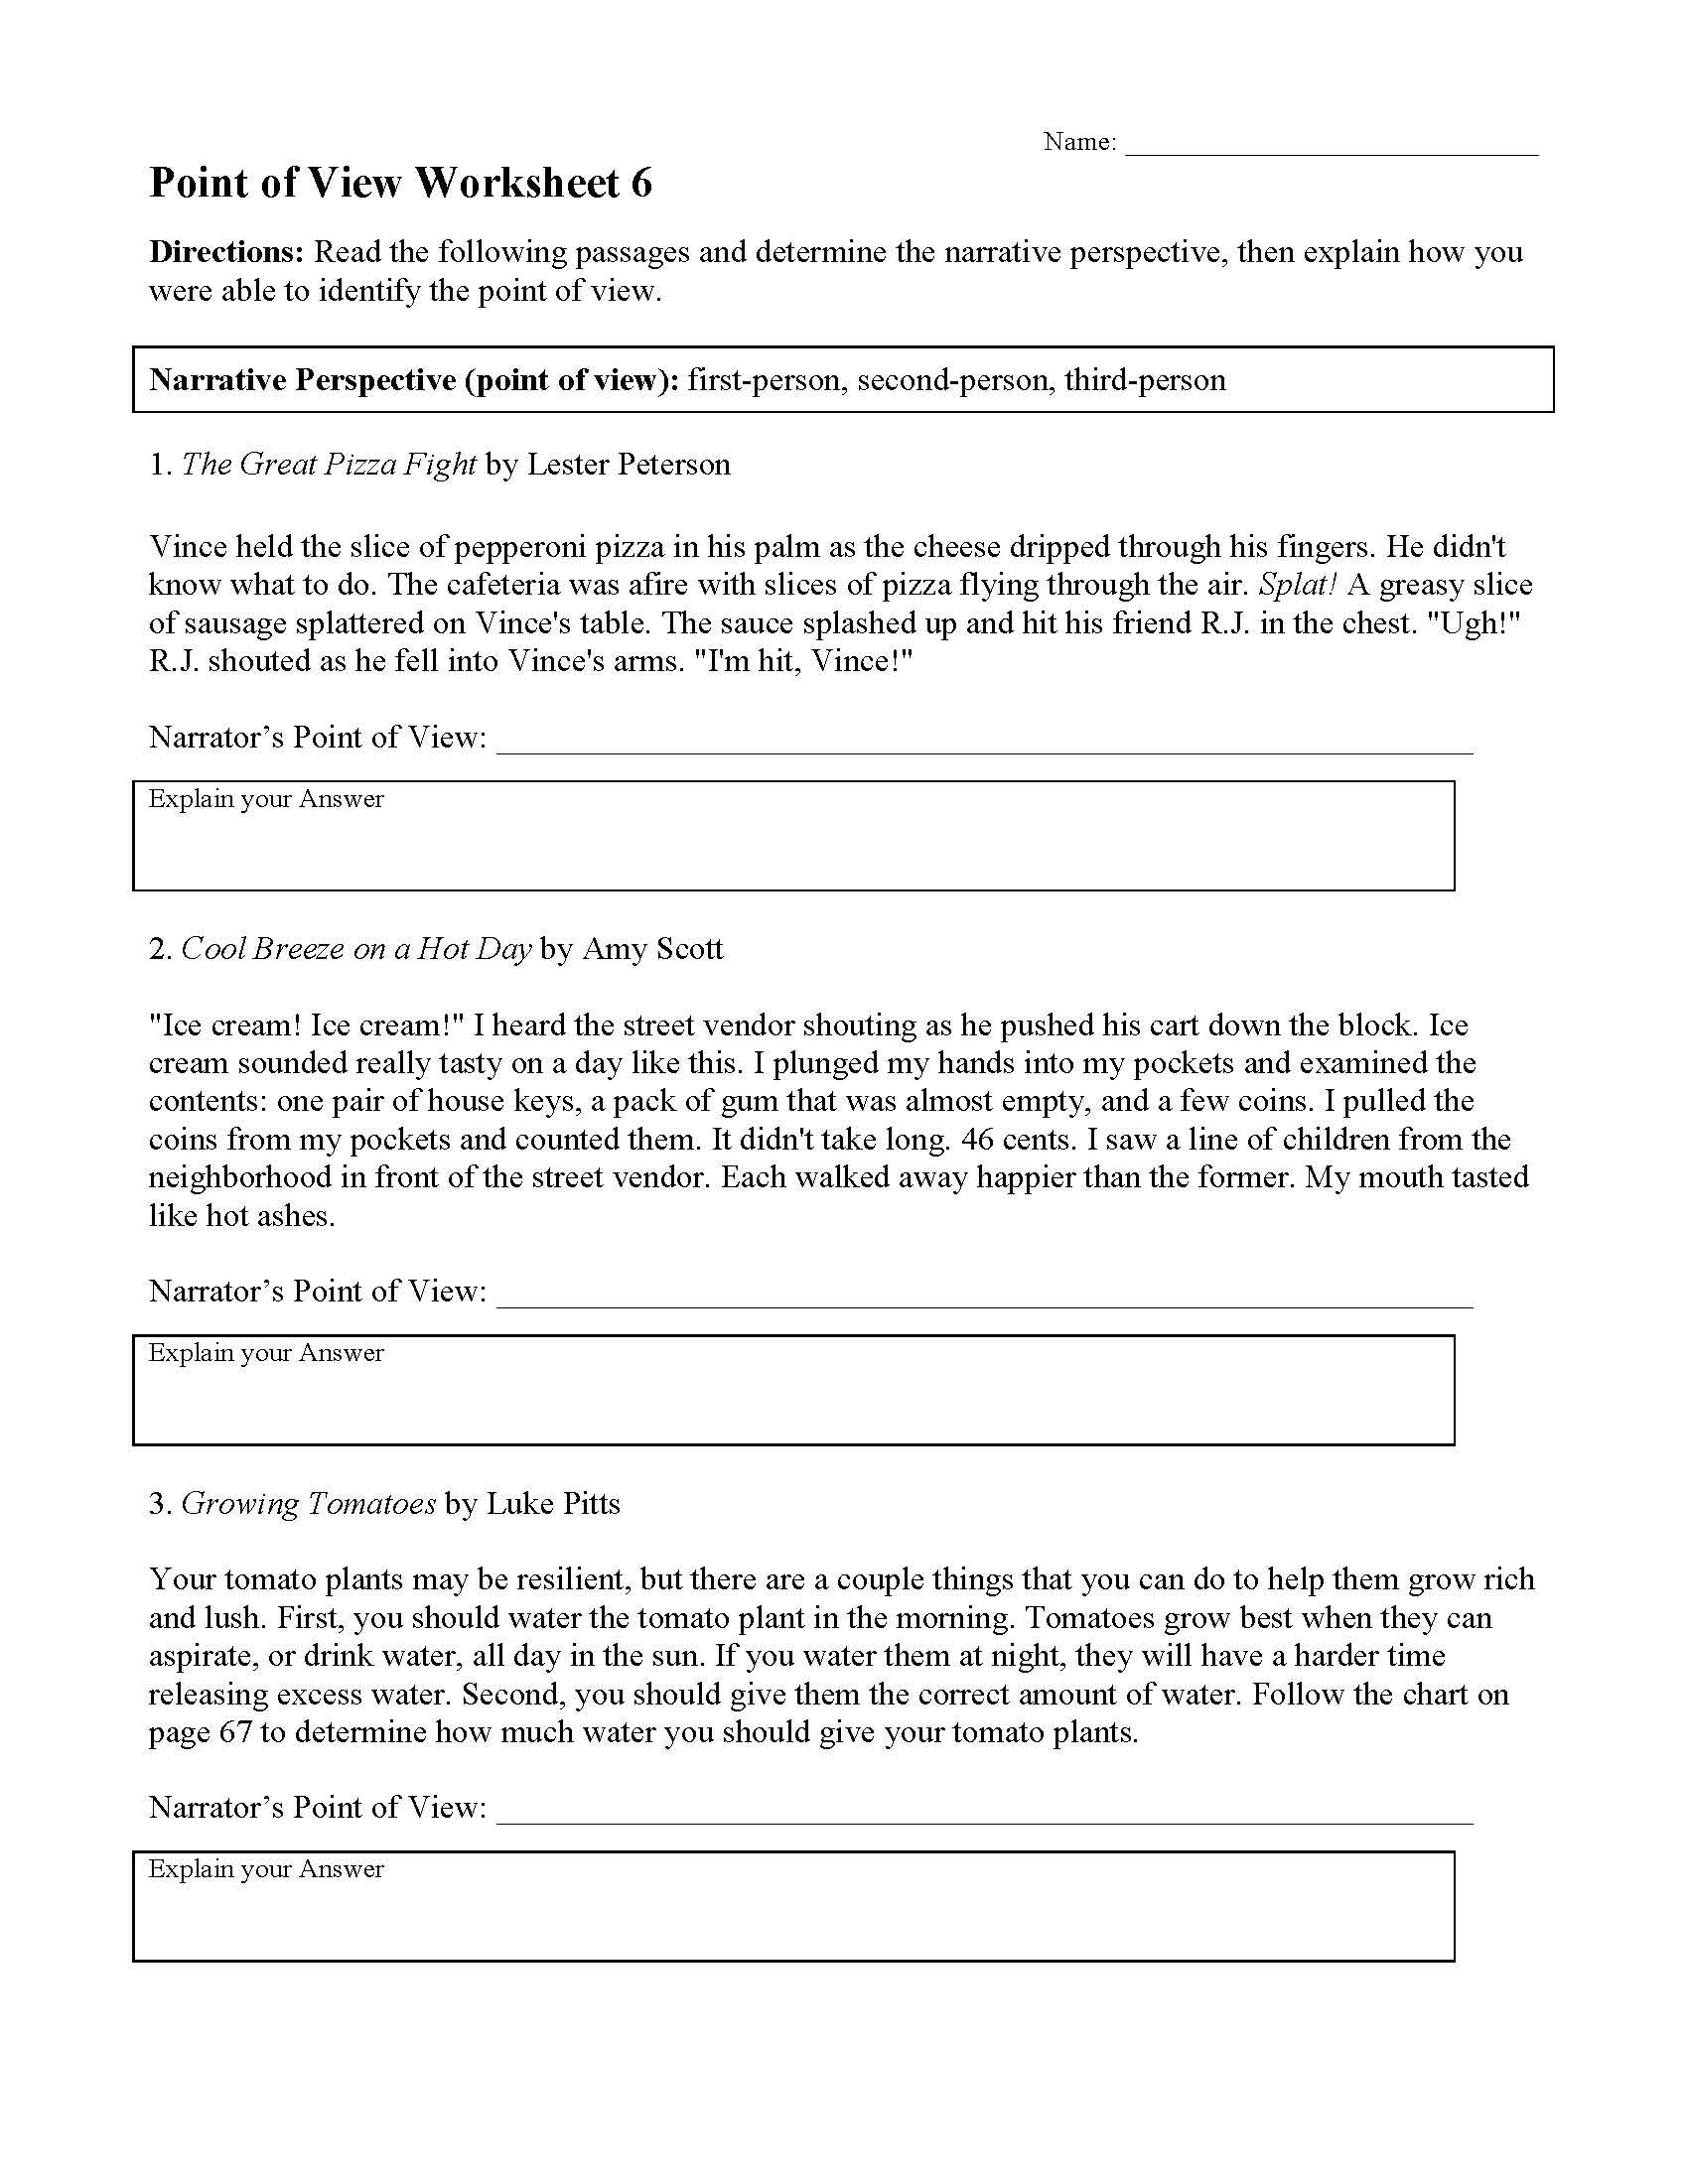 Point Of View Worksheet 6 Preview